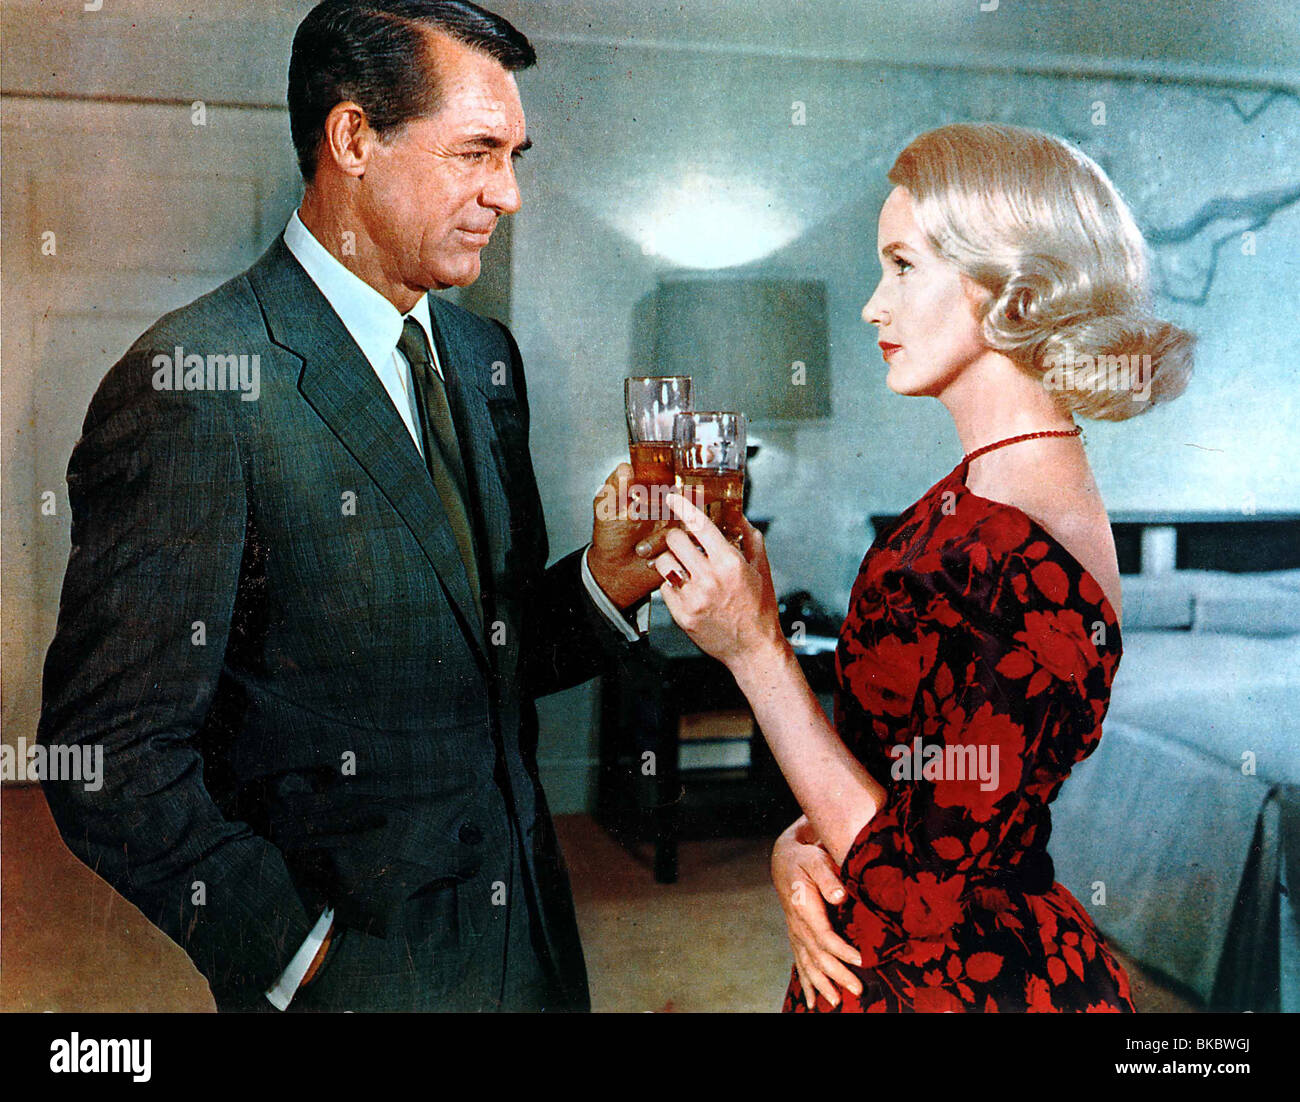 NORTH BY NORTHWEST CARY GRANT, EVA MARIE SAINT CP 001NBNW Banque D'Images